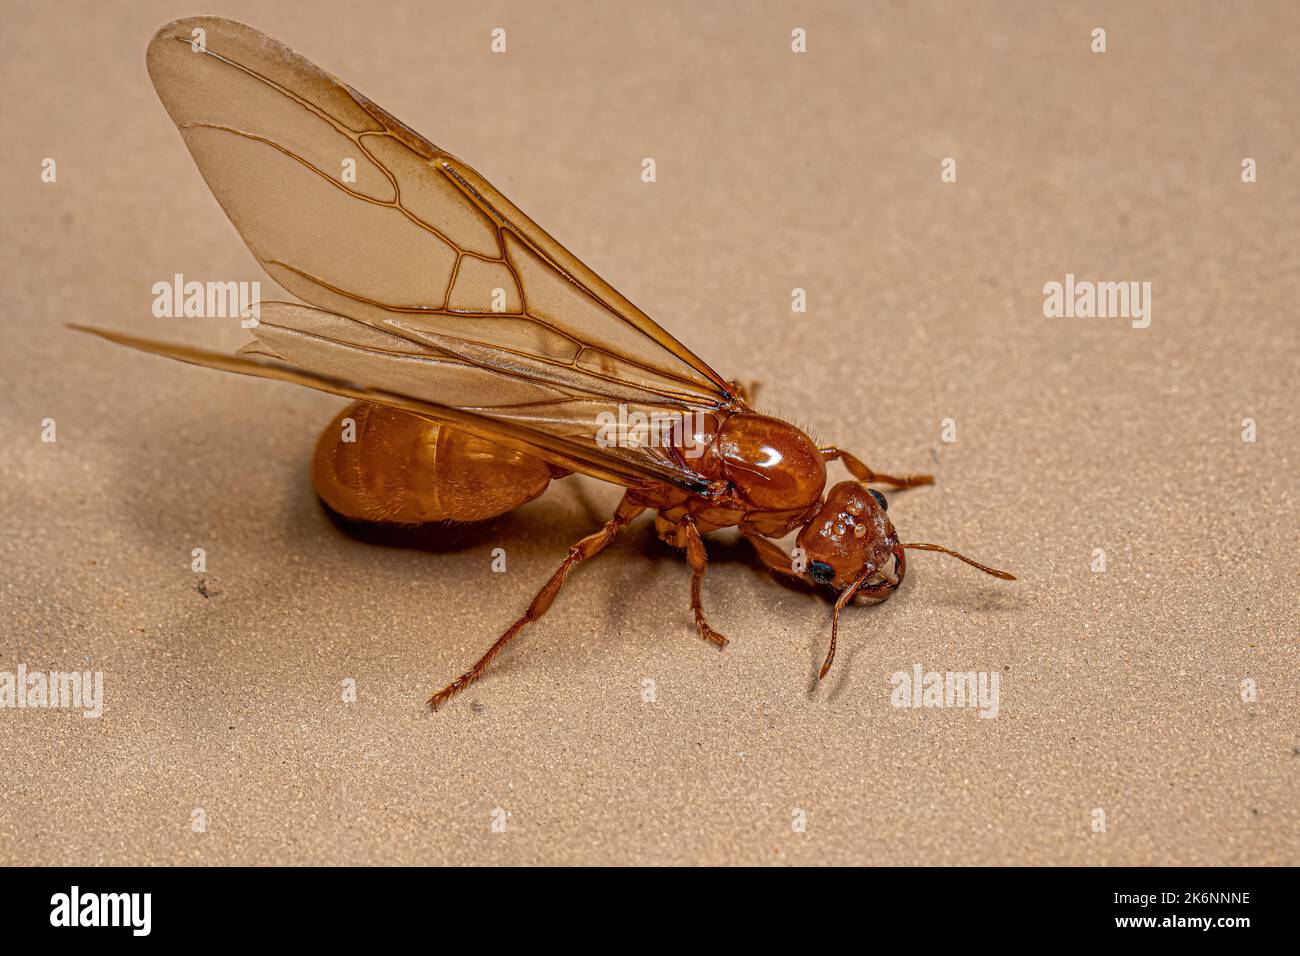 Adult Female Winged Thief Queen Ant of the Genus Carebara Stock Photo